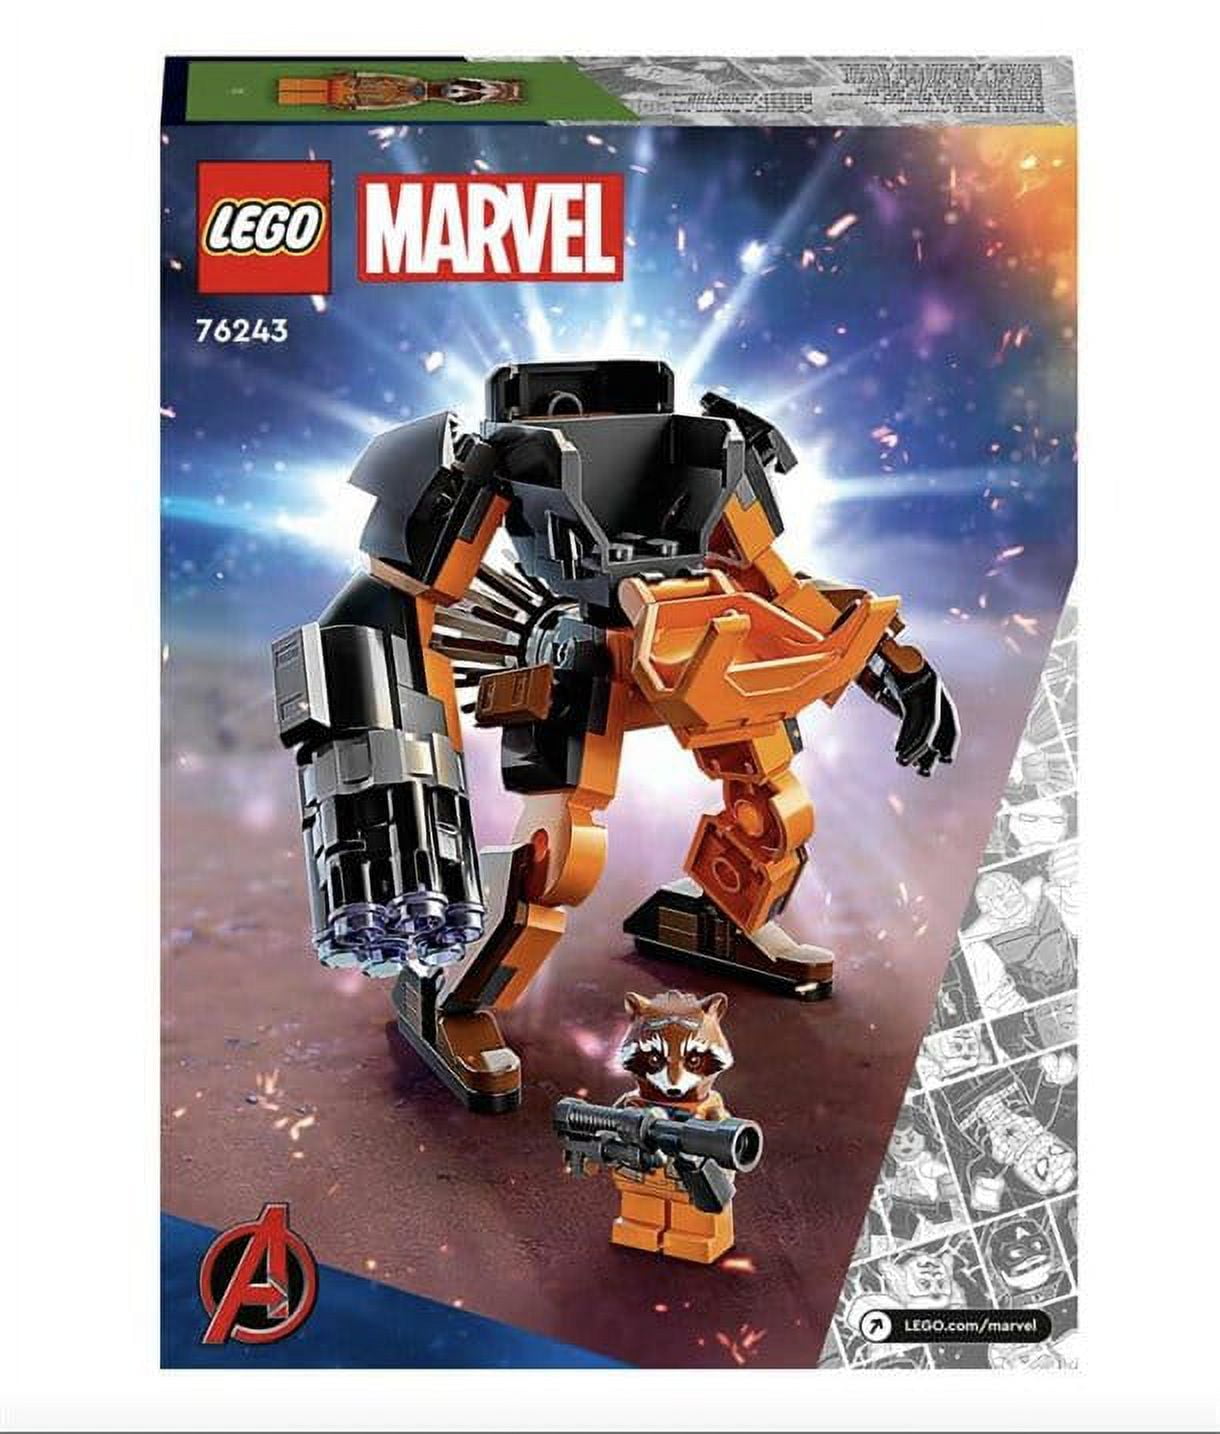  LEGO Marvel Iron Man Mech Armor 76203 Building Kit; Collectible  Mech and Minifigure for Iron Man Fans Aged 7+ (130 Pieces) : Toys & Games